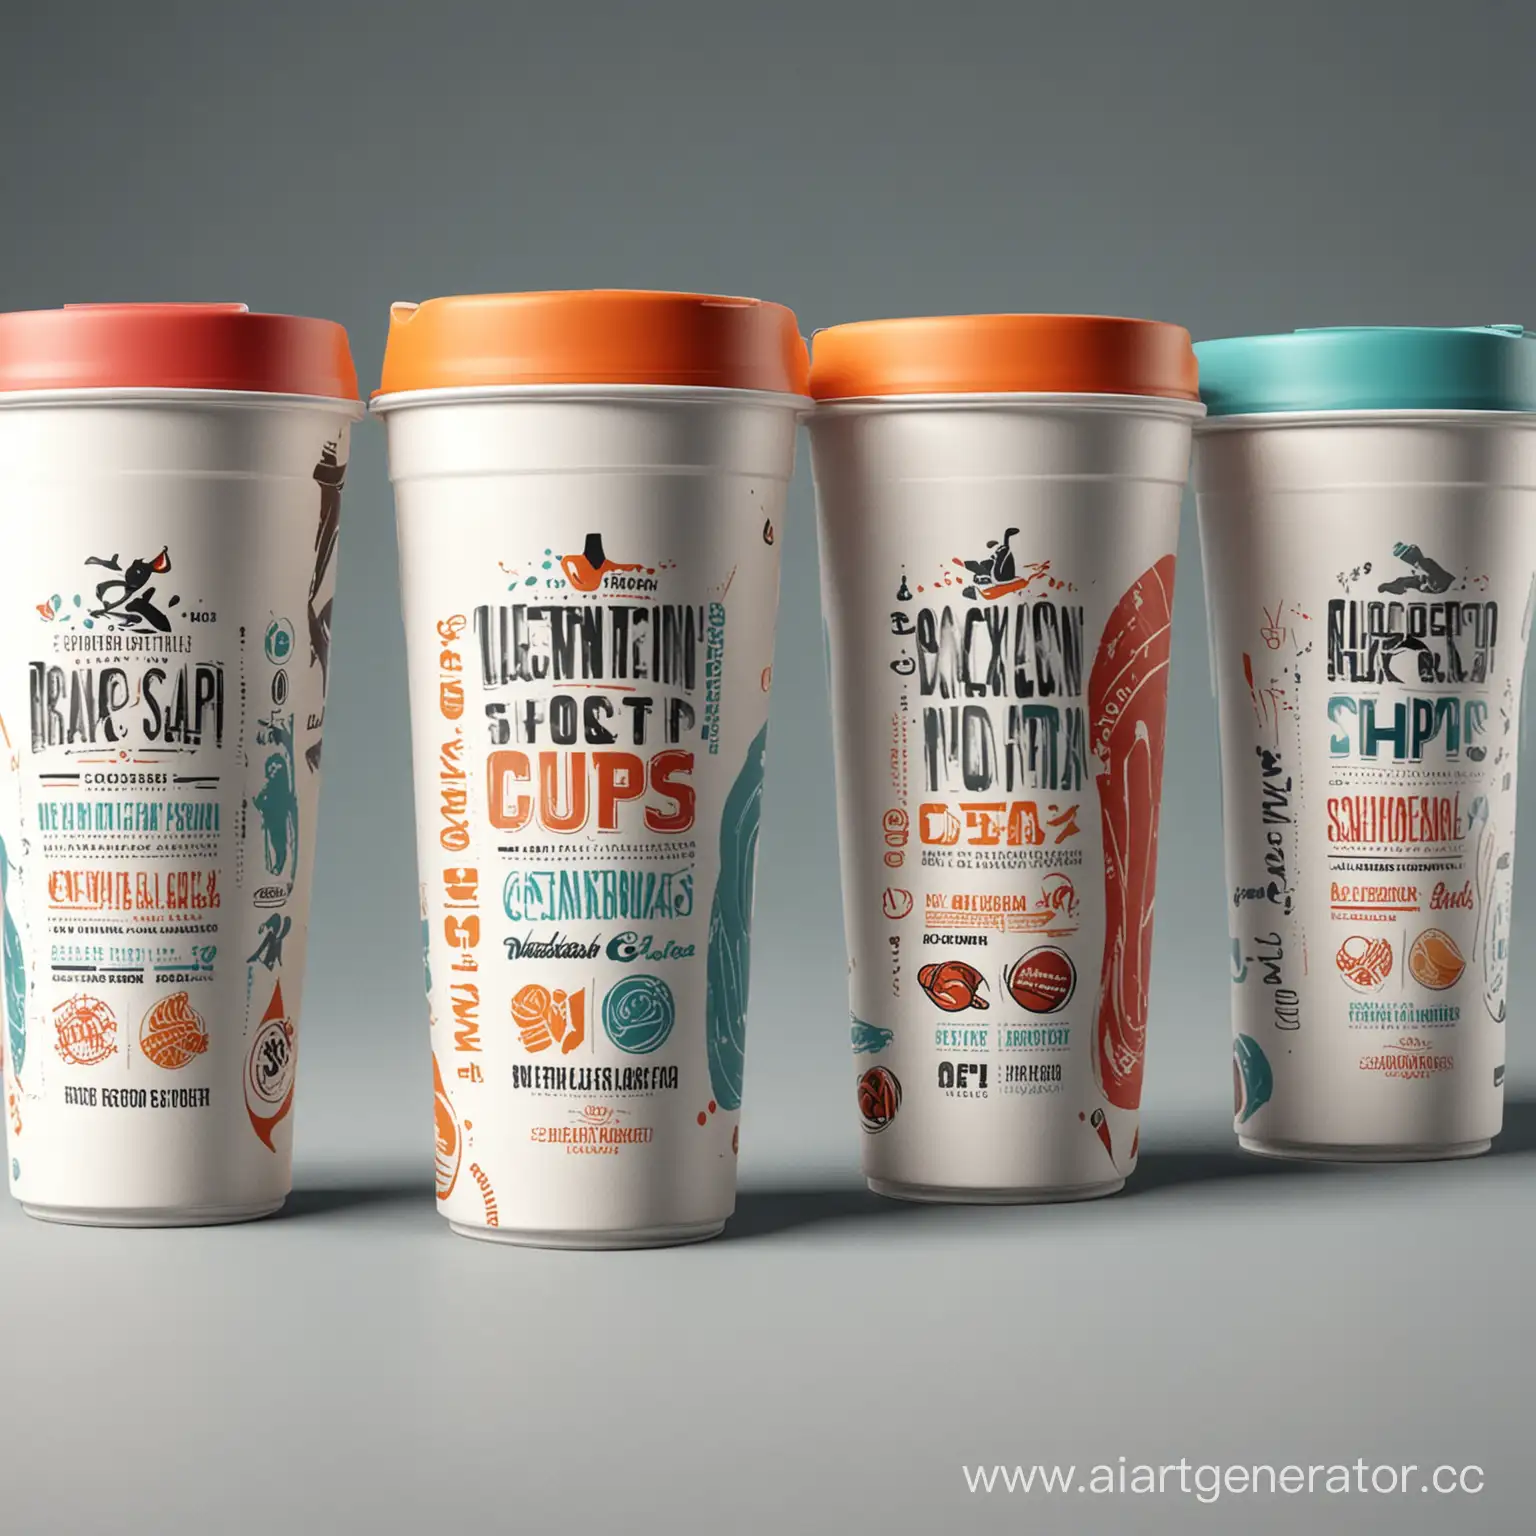 Modern-Sports-Nutrition-Cups-for-Active-Lifestyles